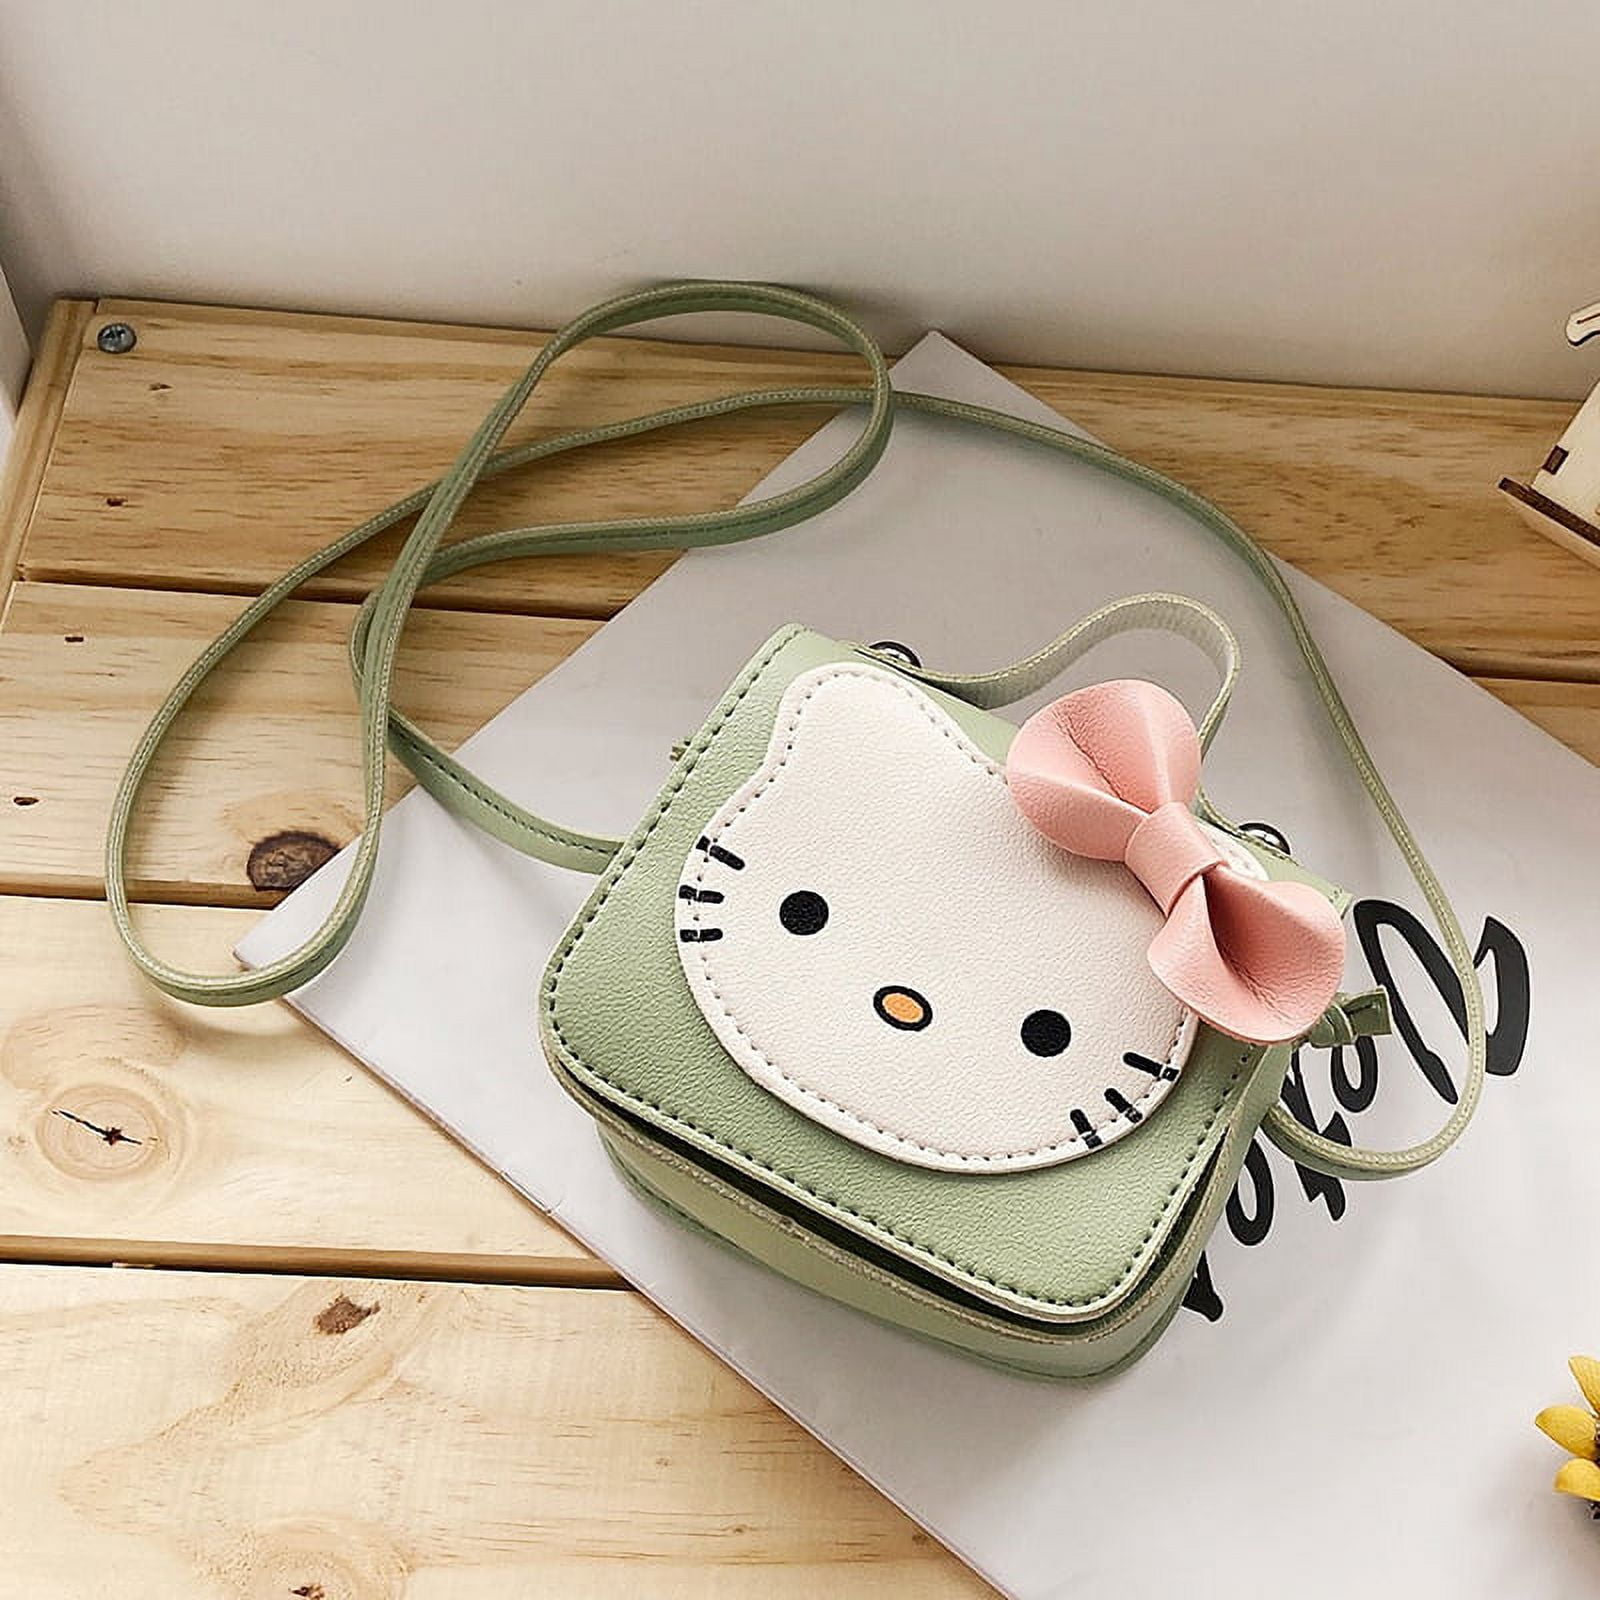 2018 New Kids Purses Little Girls Gifts Toddler Purse Kid Mini Messenger  Bag Children PU Leather Shell One Shoulder Bag From Dtysunny2018, $14.57